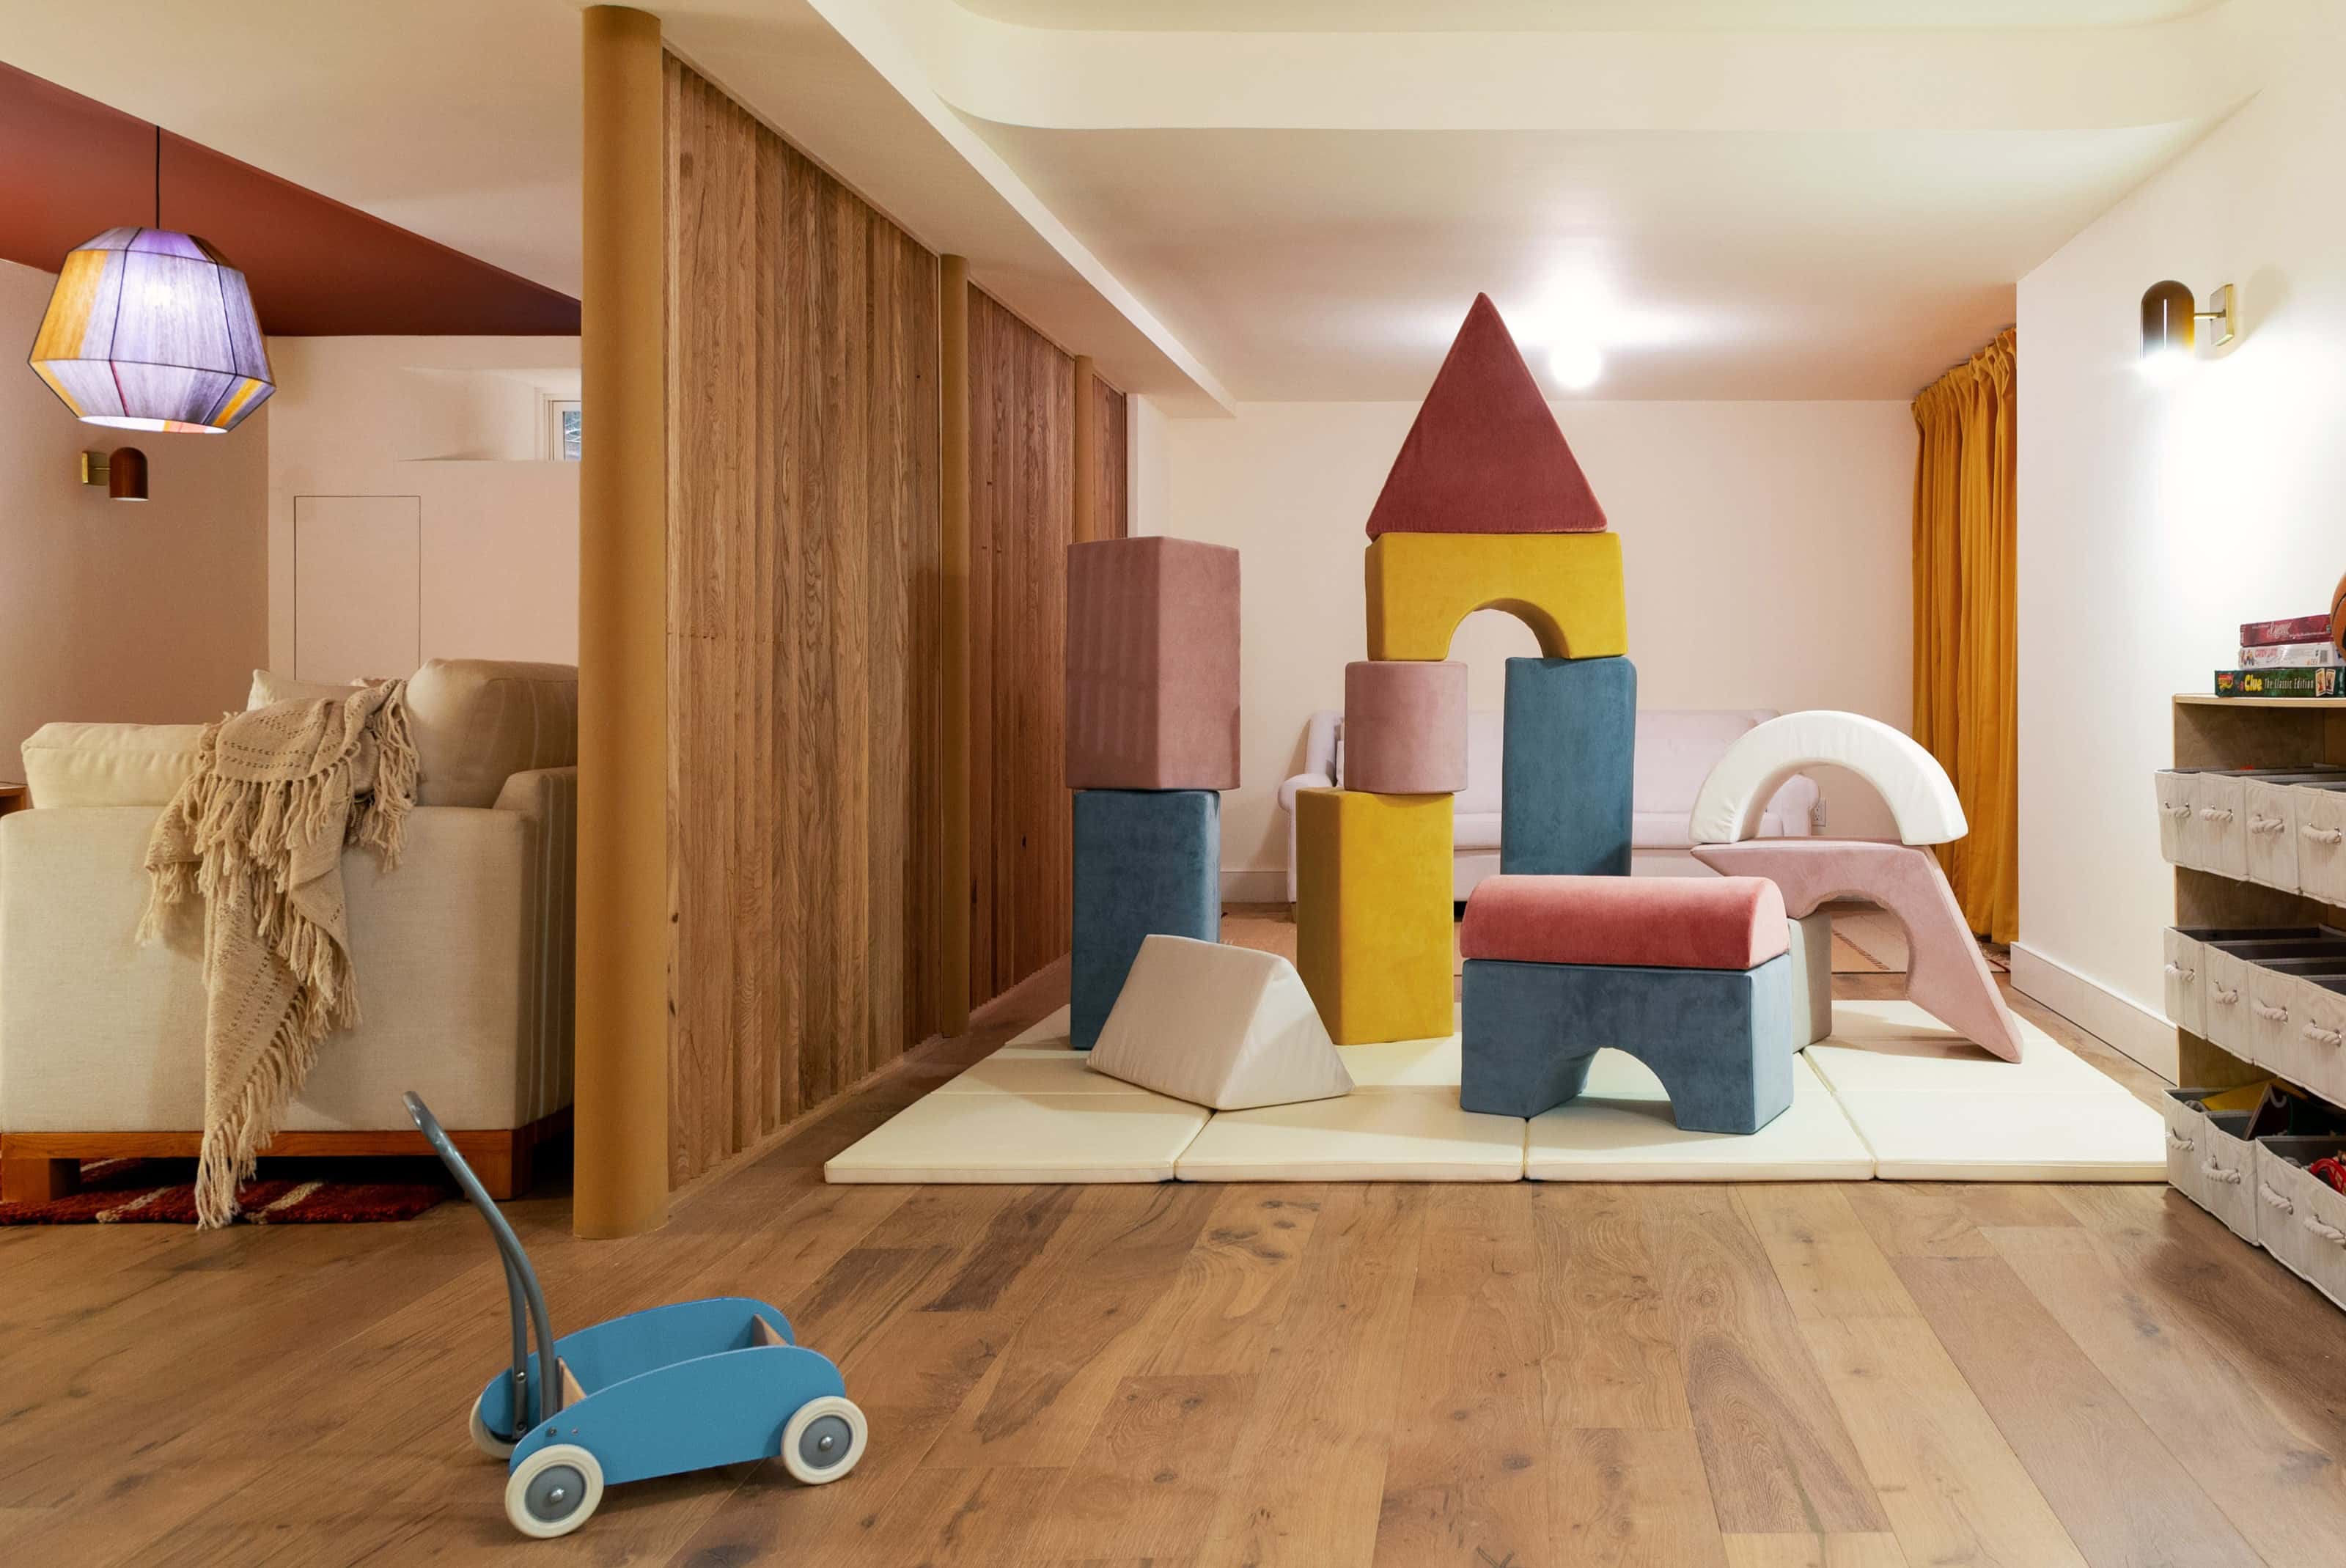 How To Separate A Living Room From A Play Area